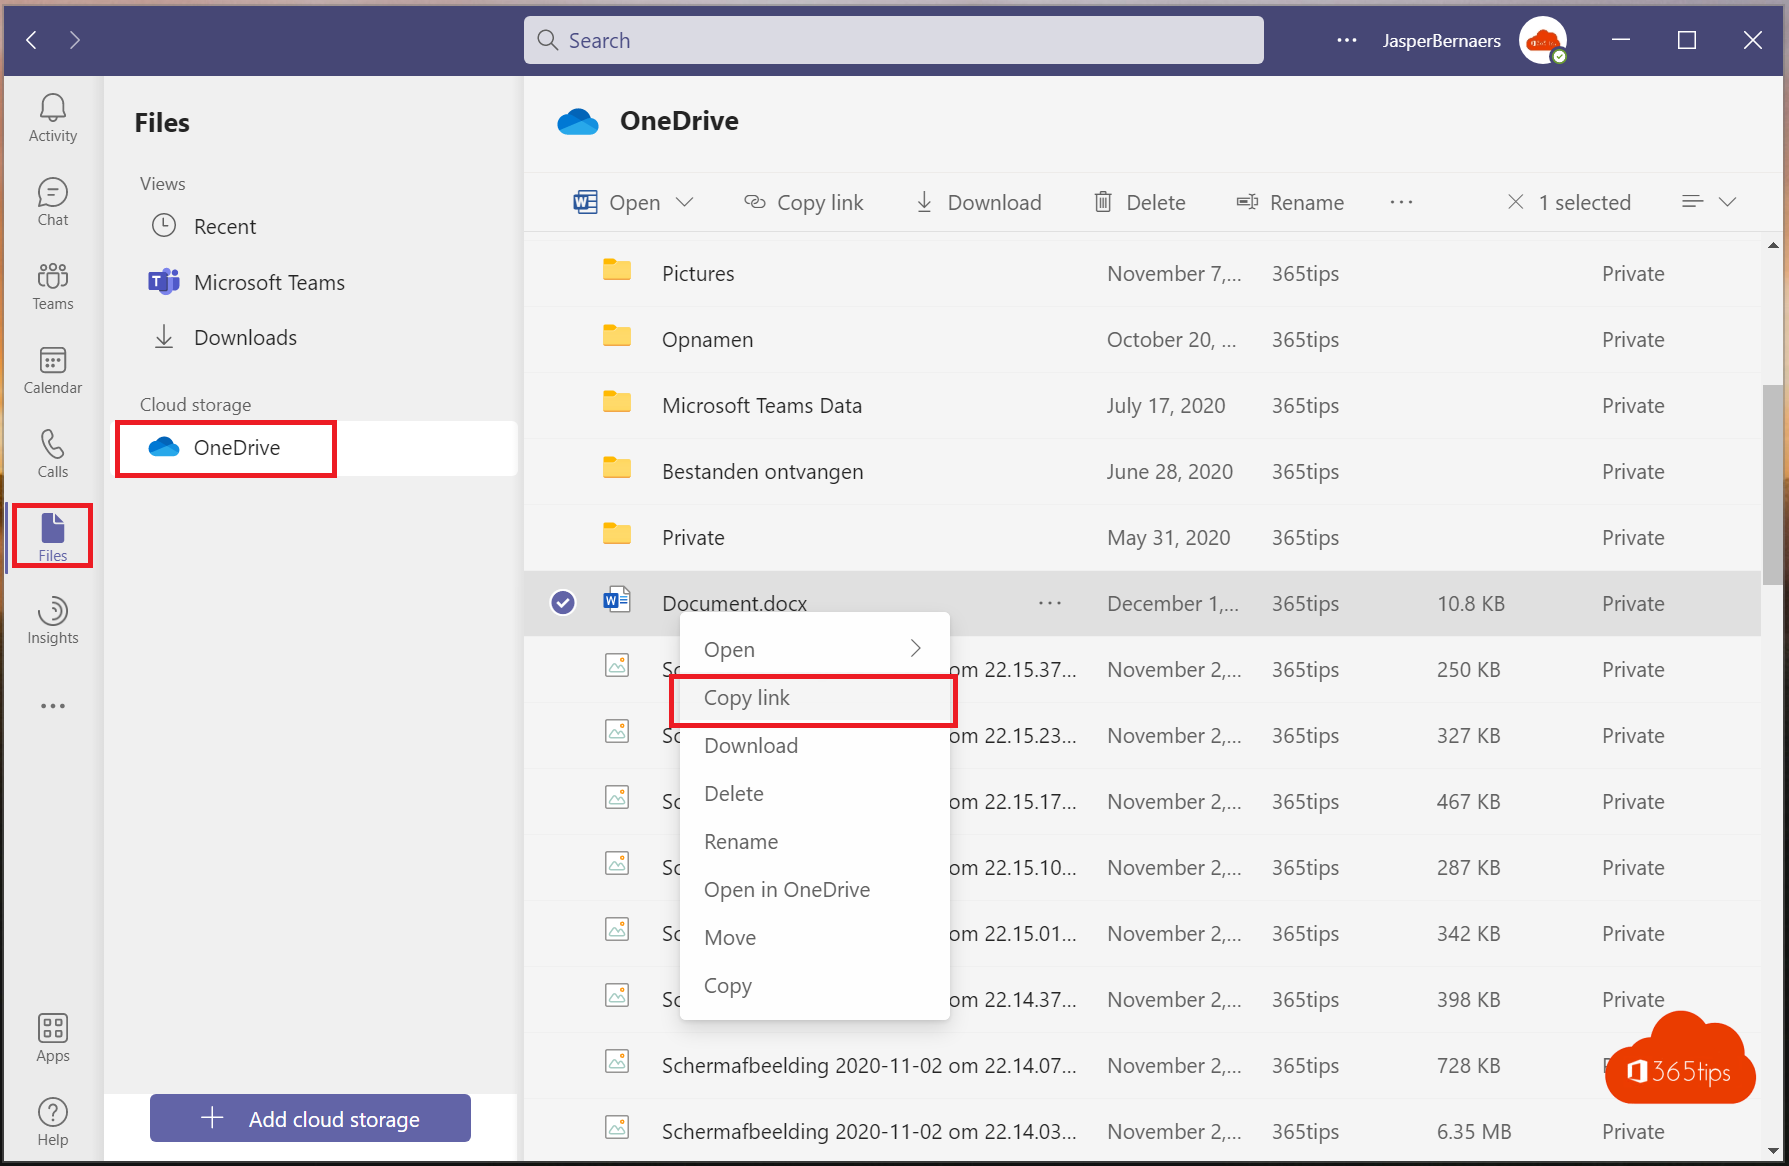 🔗 Tutorial: How to share files via a web link in Microsoft Teams?